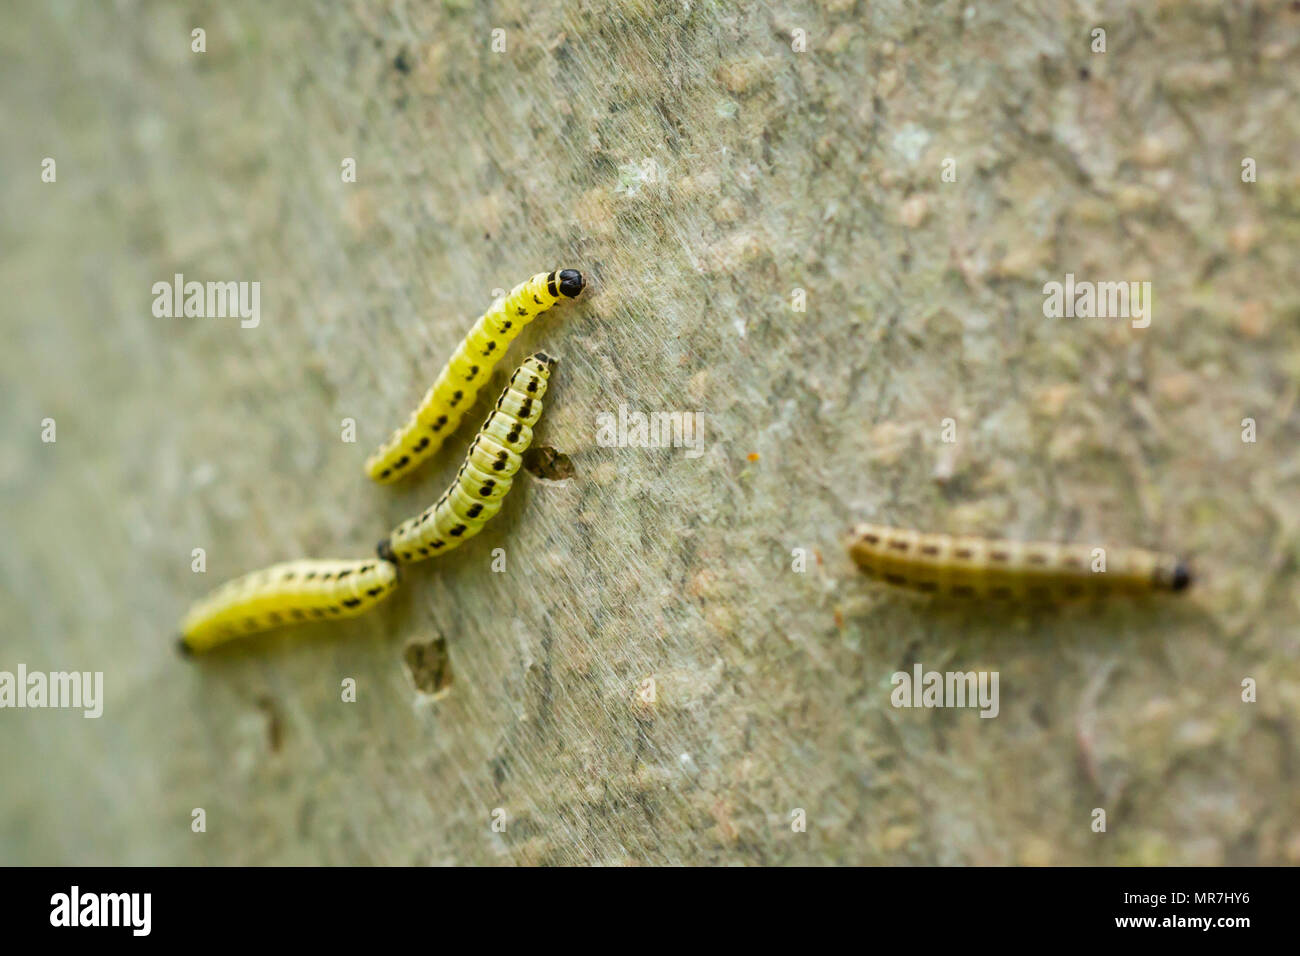 Closeup of a pest larvae caterpillars of the Yponomeutidae family or ermine moths, formed communal webs around a tree. Stock Photo